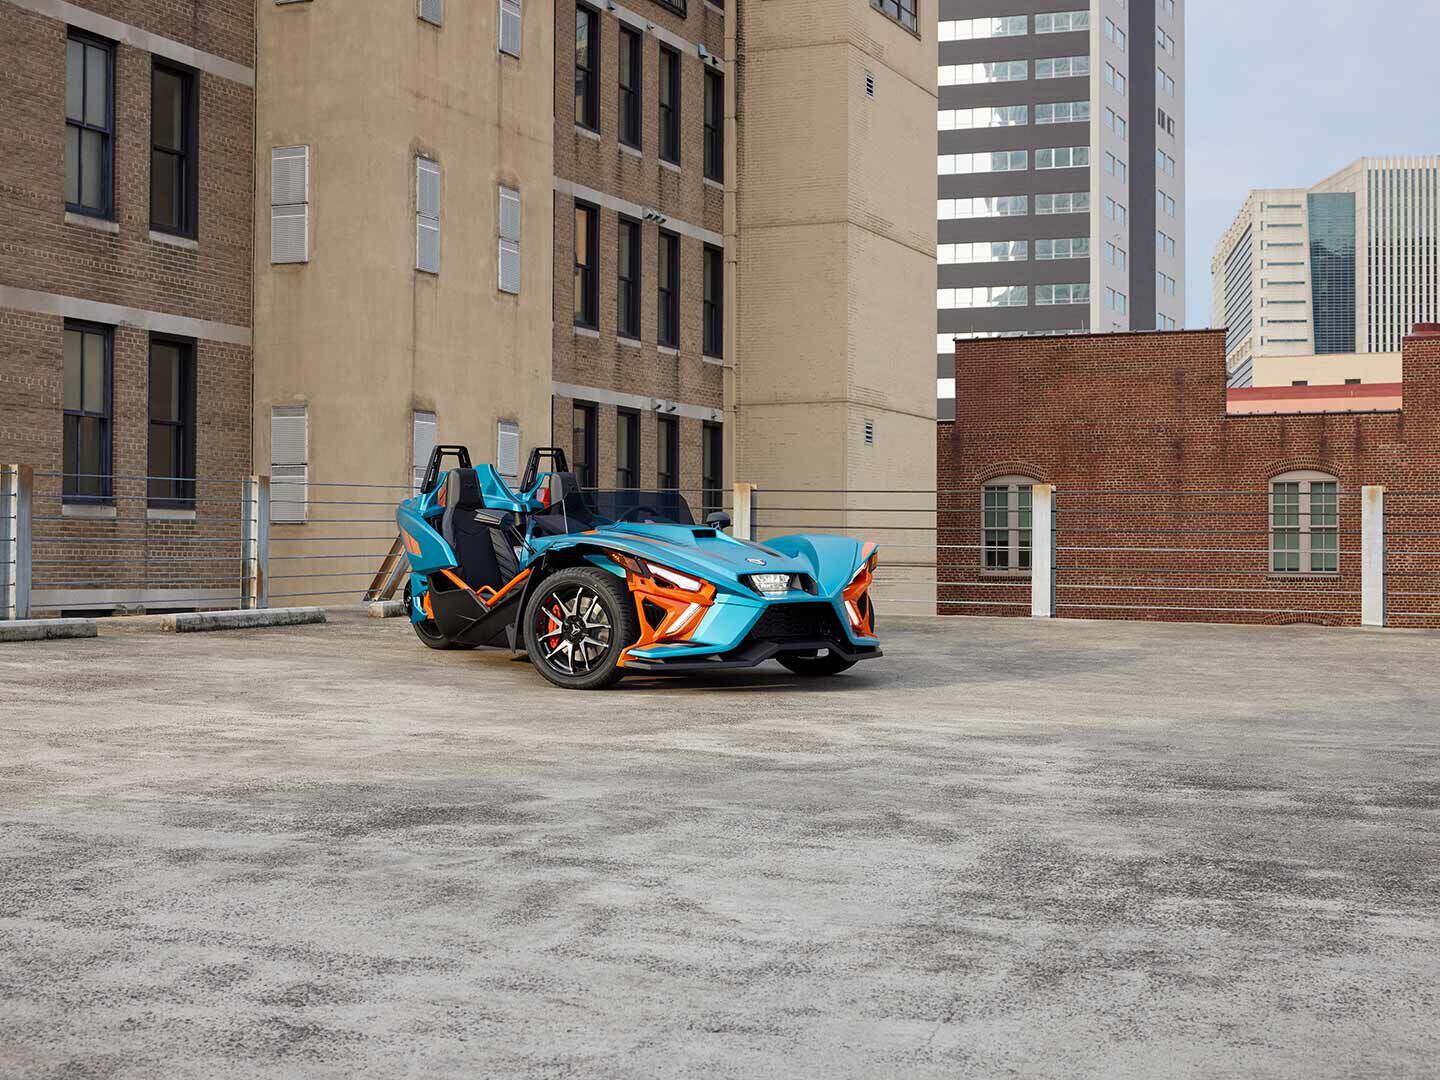 We trade two wheels for three inside Polaris’ top-spec 2023 Slingshot R autocycle.